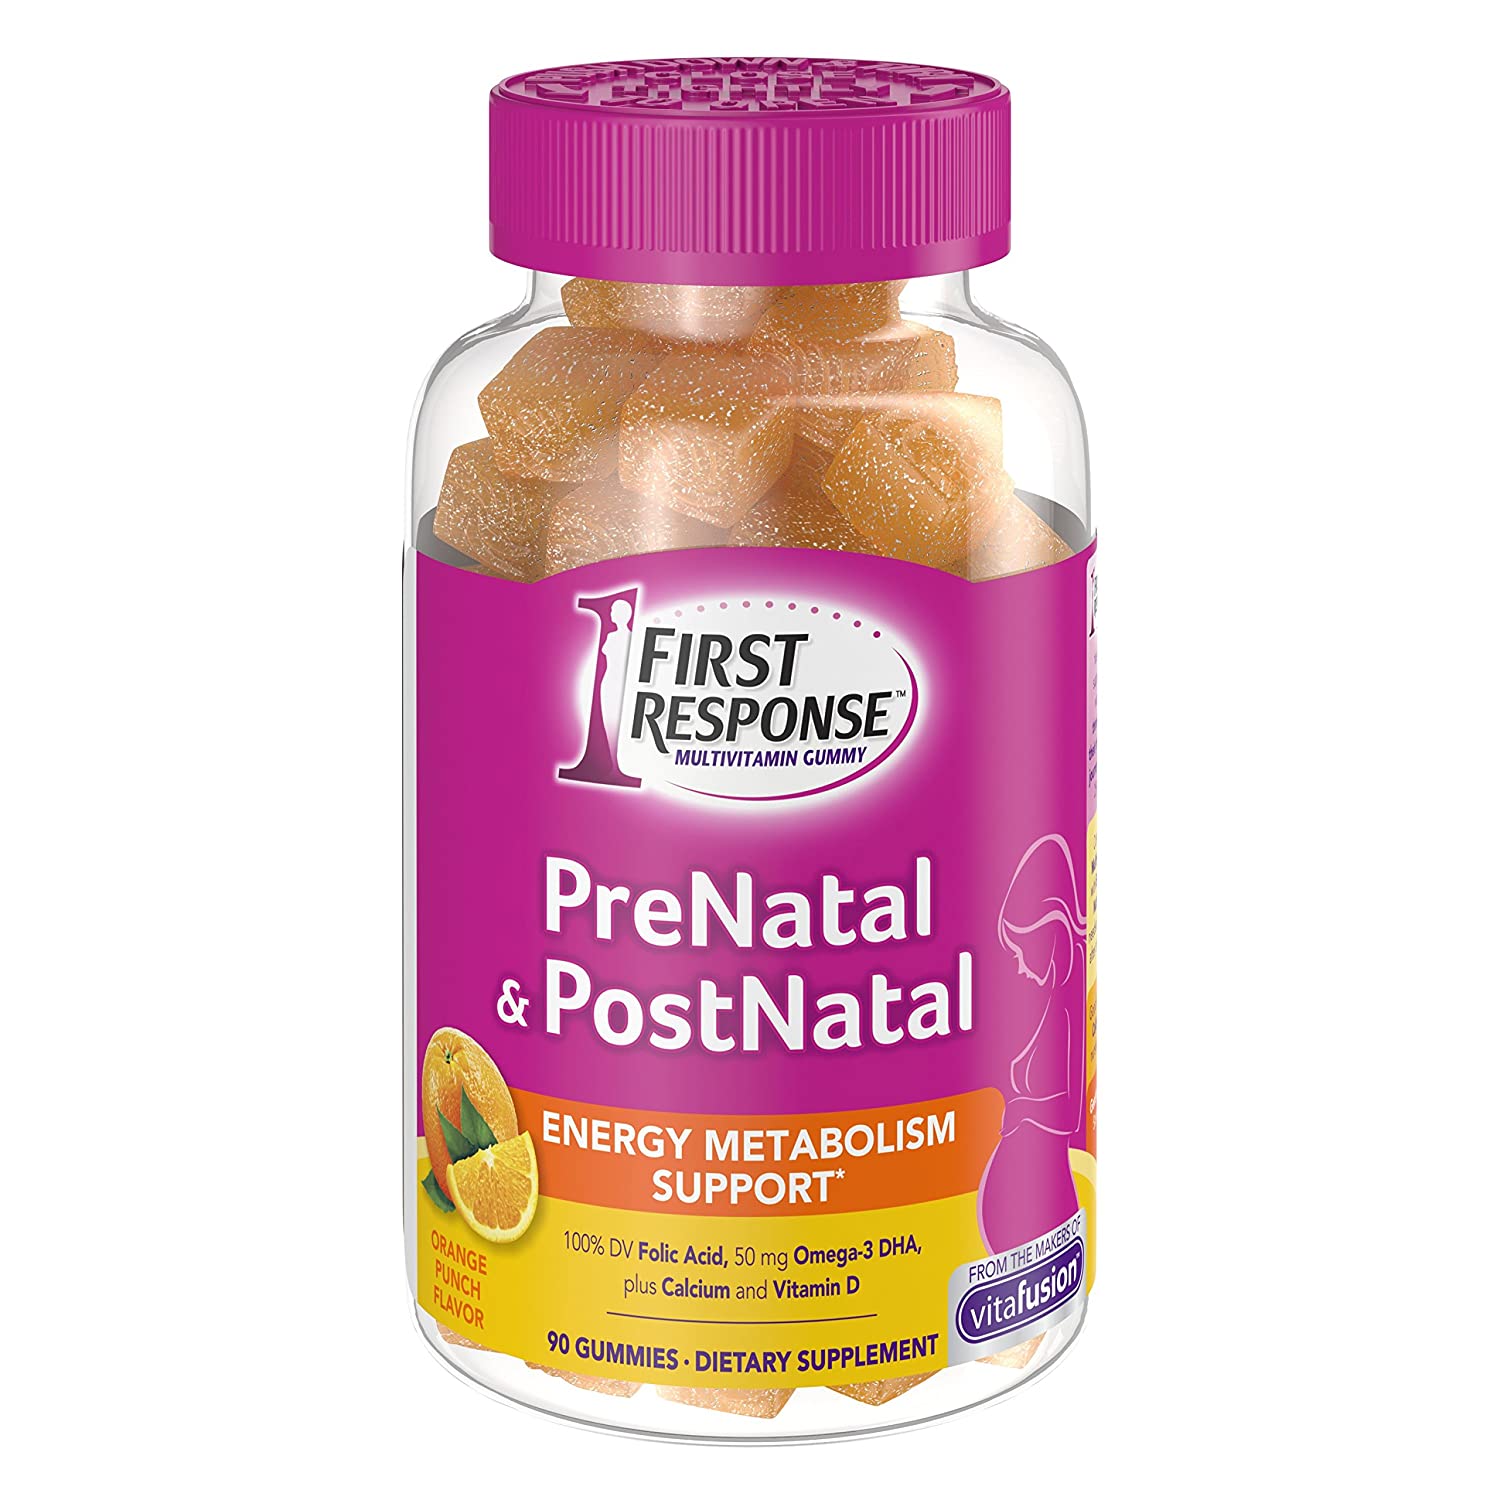 Top 9 Best Prenatal Vitamins with DHA for Pregnancy Reviews in 2022 4